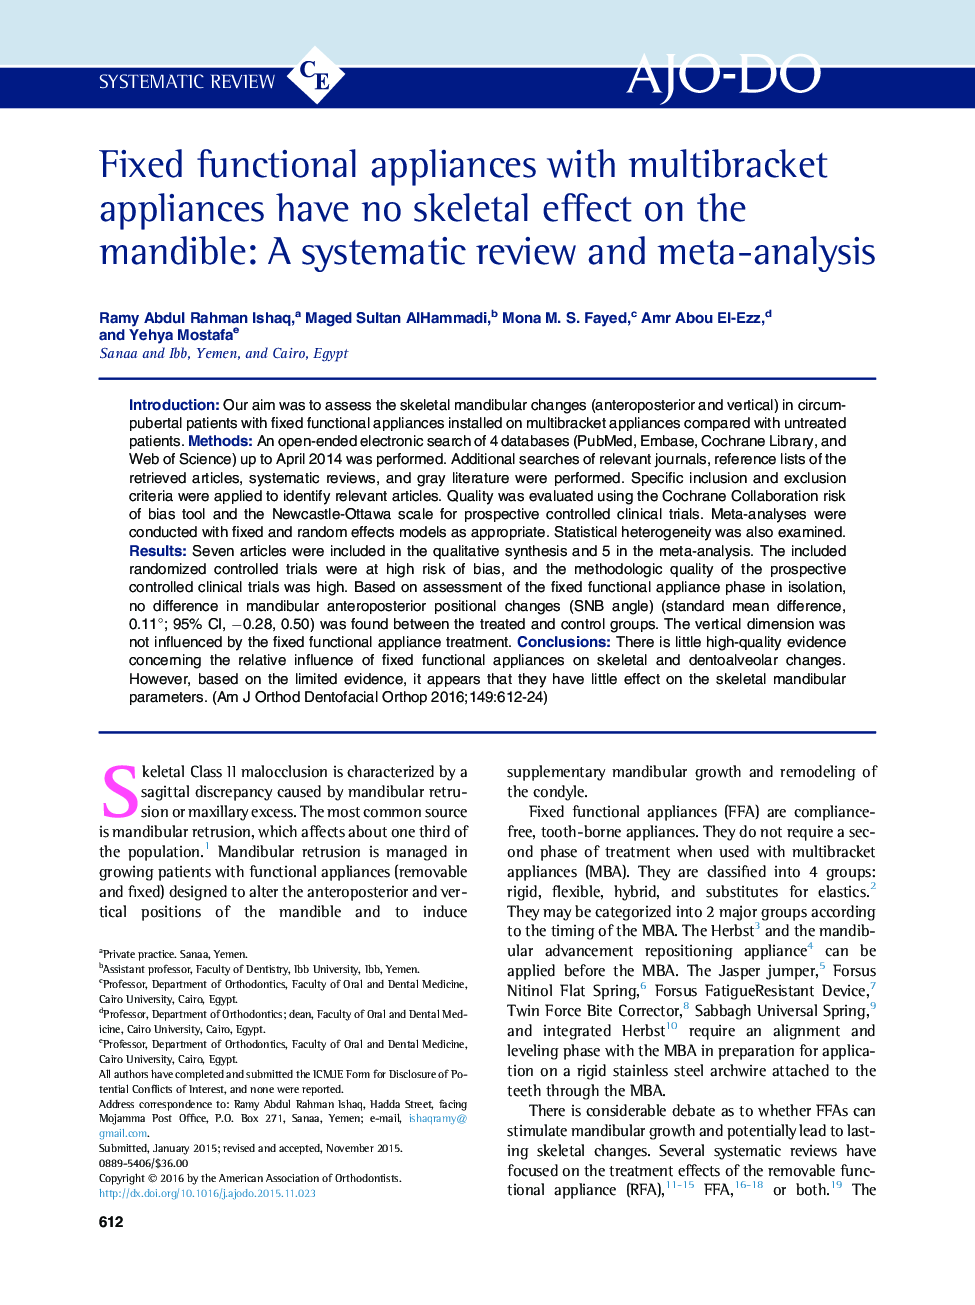 Fixed functional appliances with multibracket appliances have no skeletal effect on the mandible: A systematic review and meta-analysis 